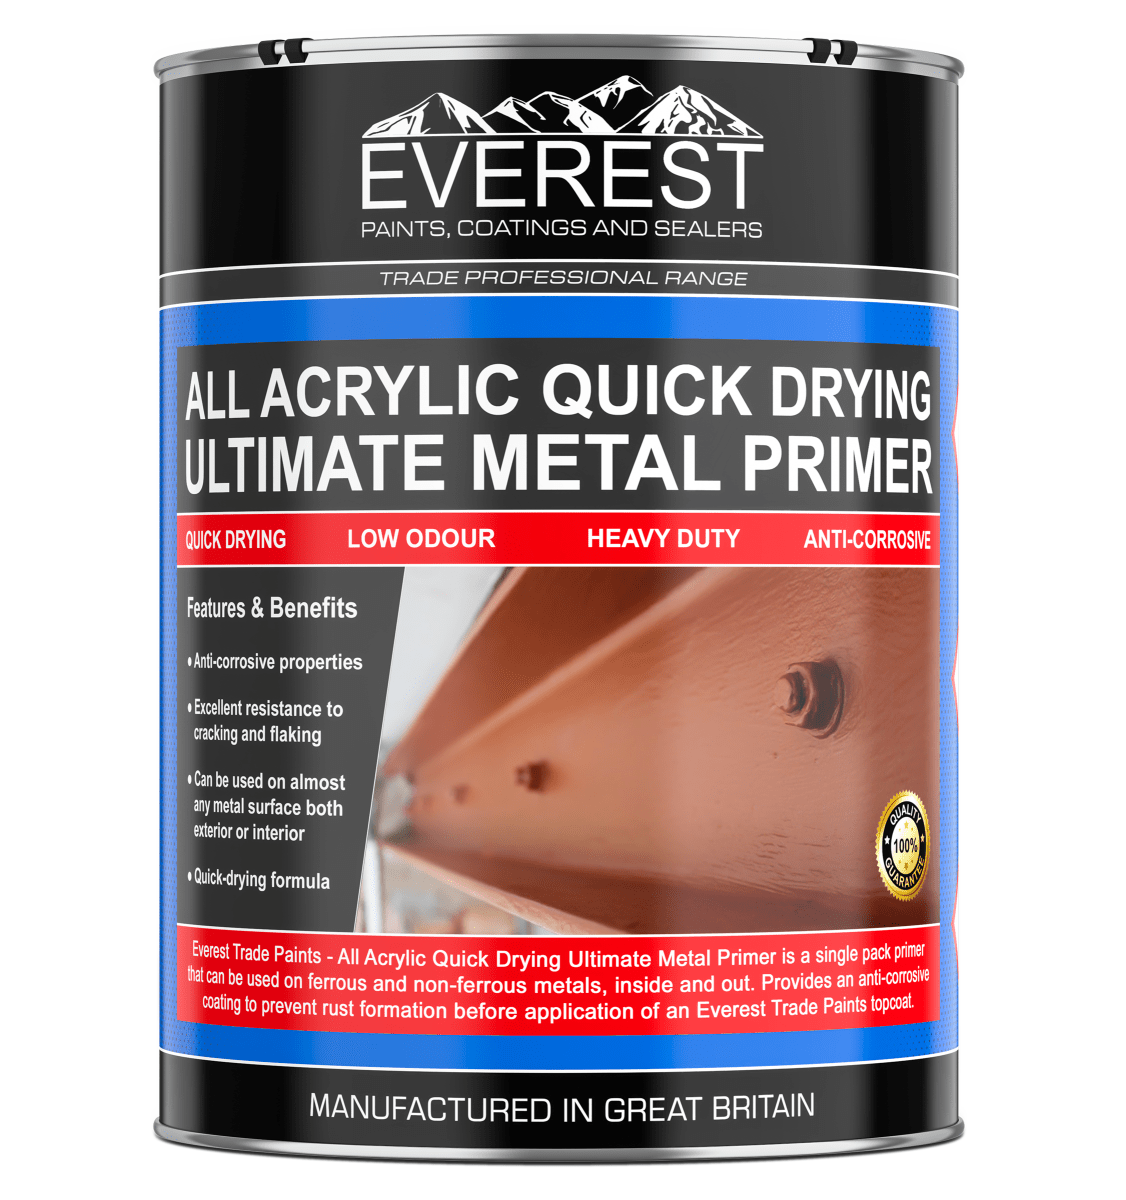 Everest Acrylic Quick Drying Metal Primer